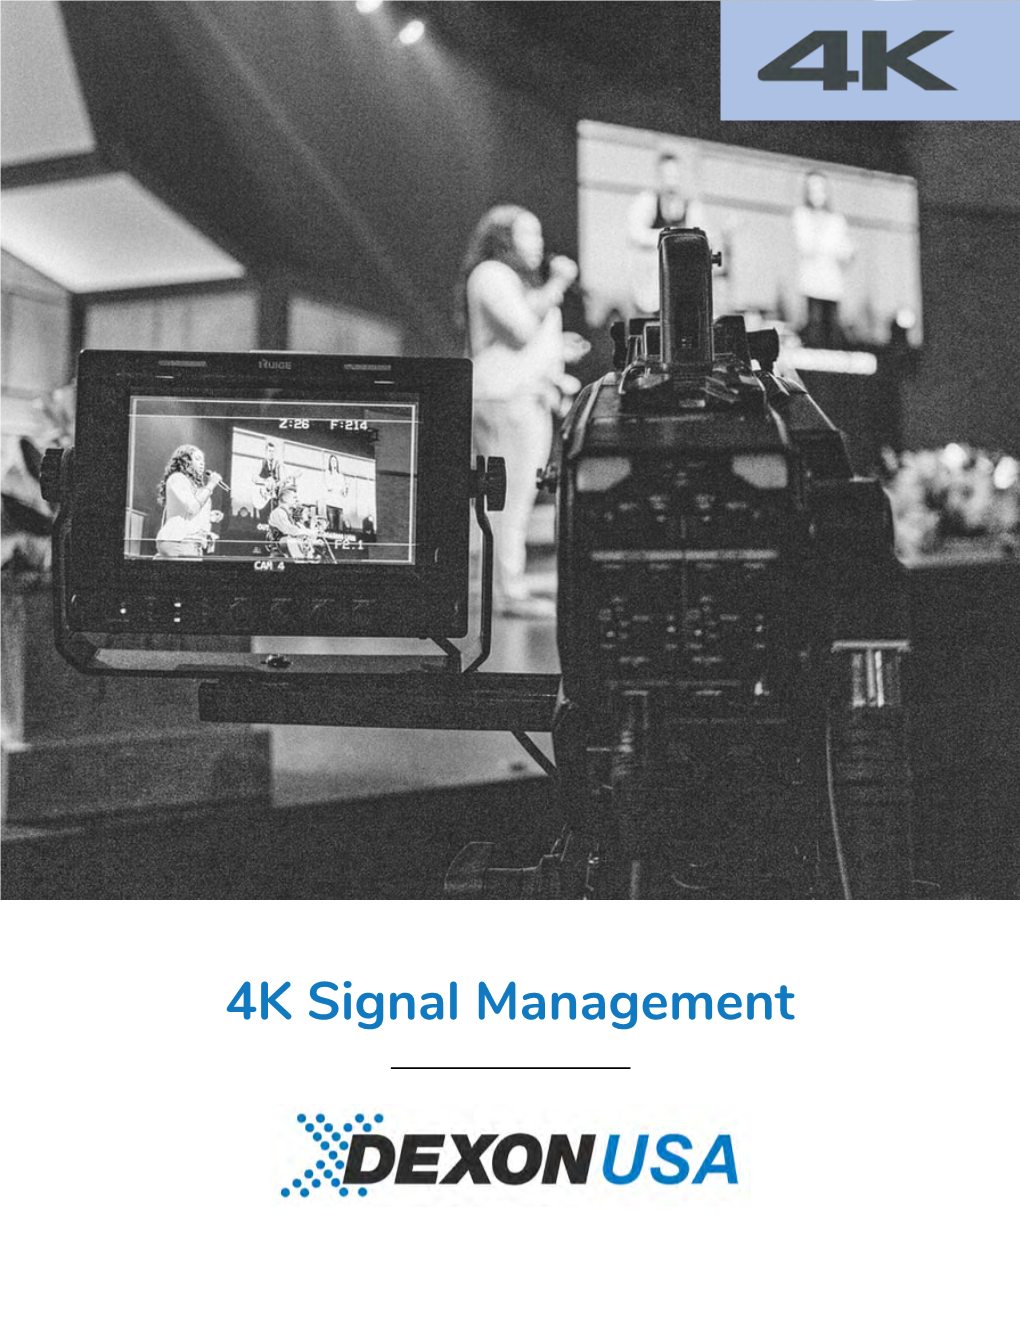 4K Signal Management 4K Is Here!